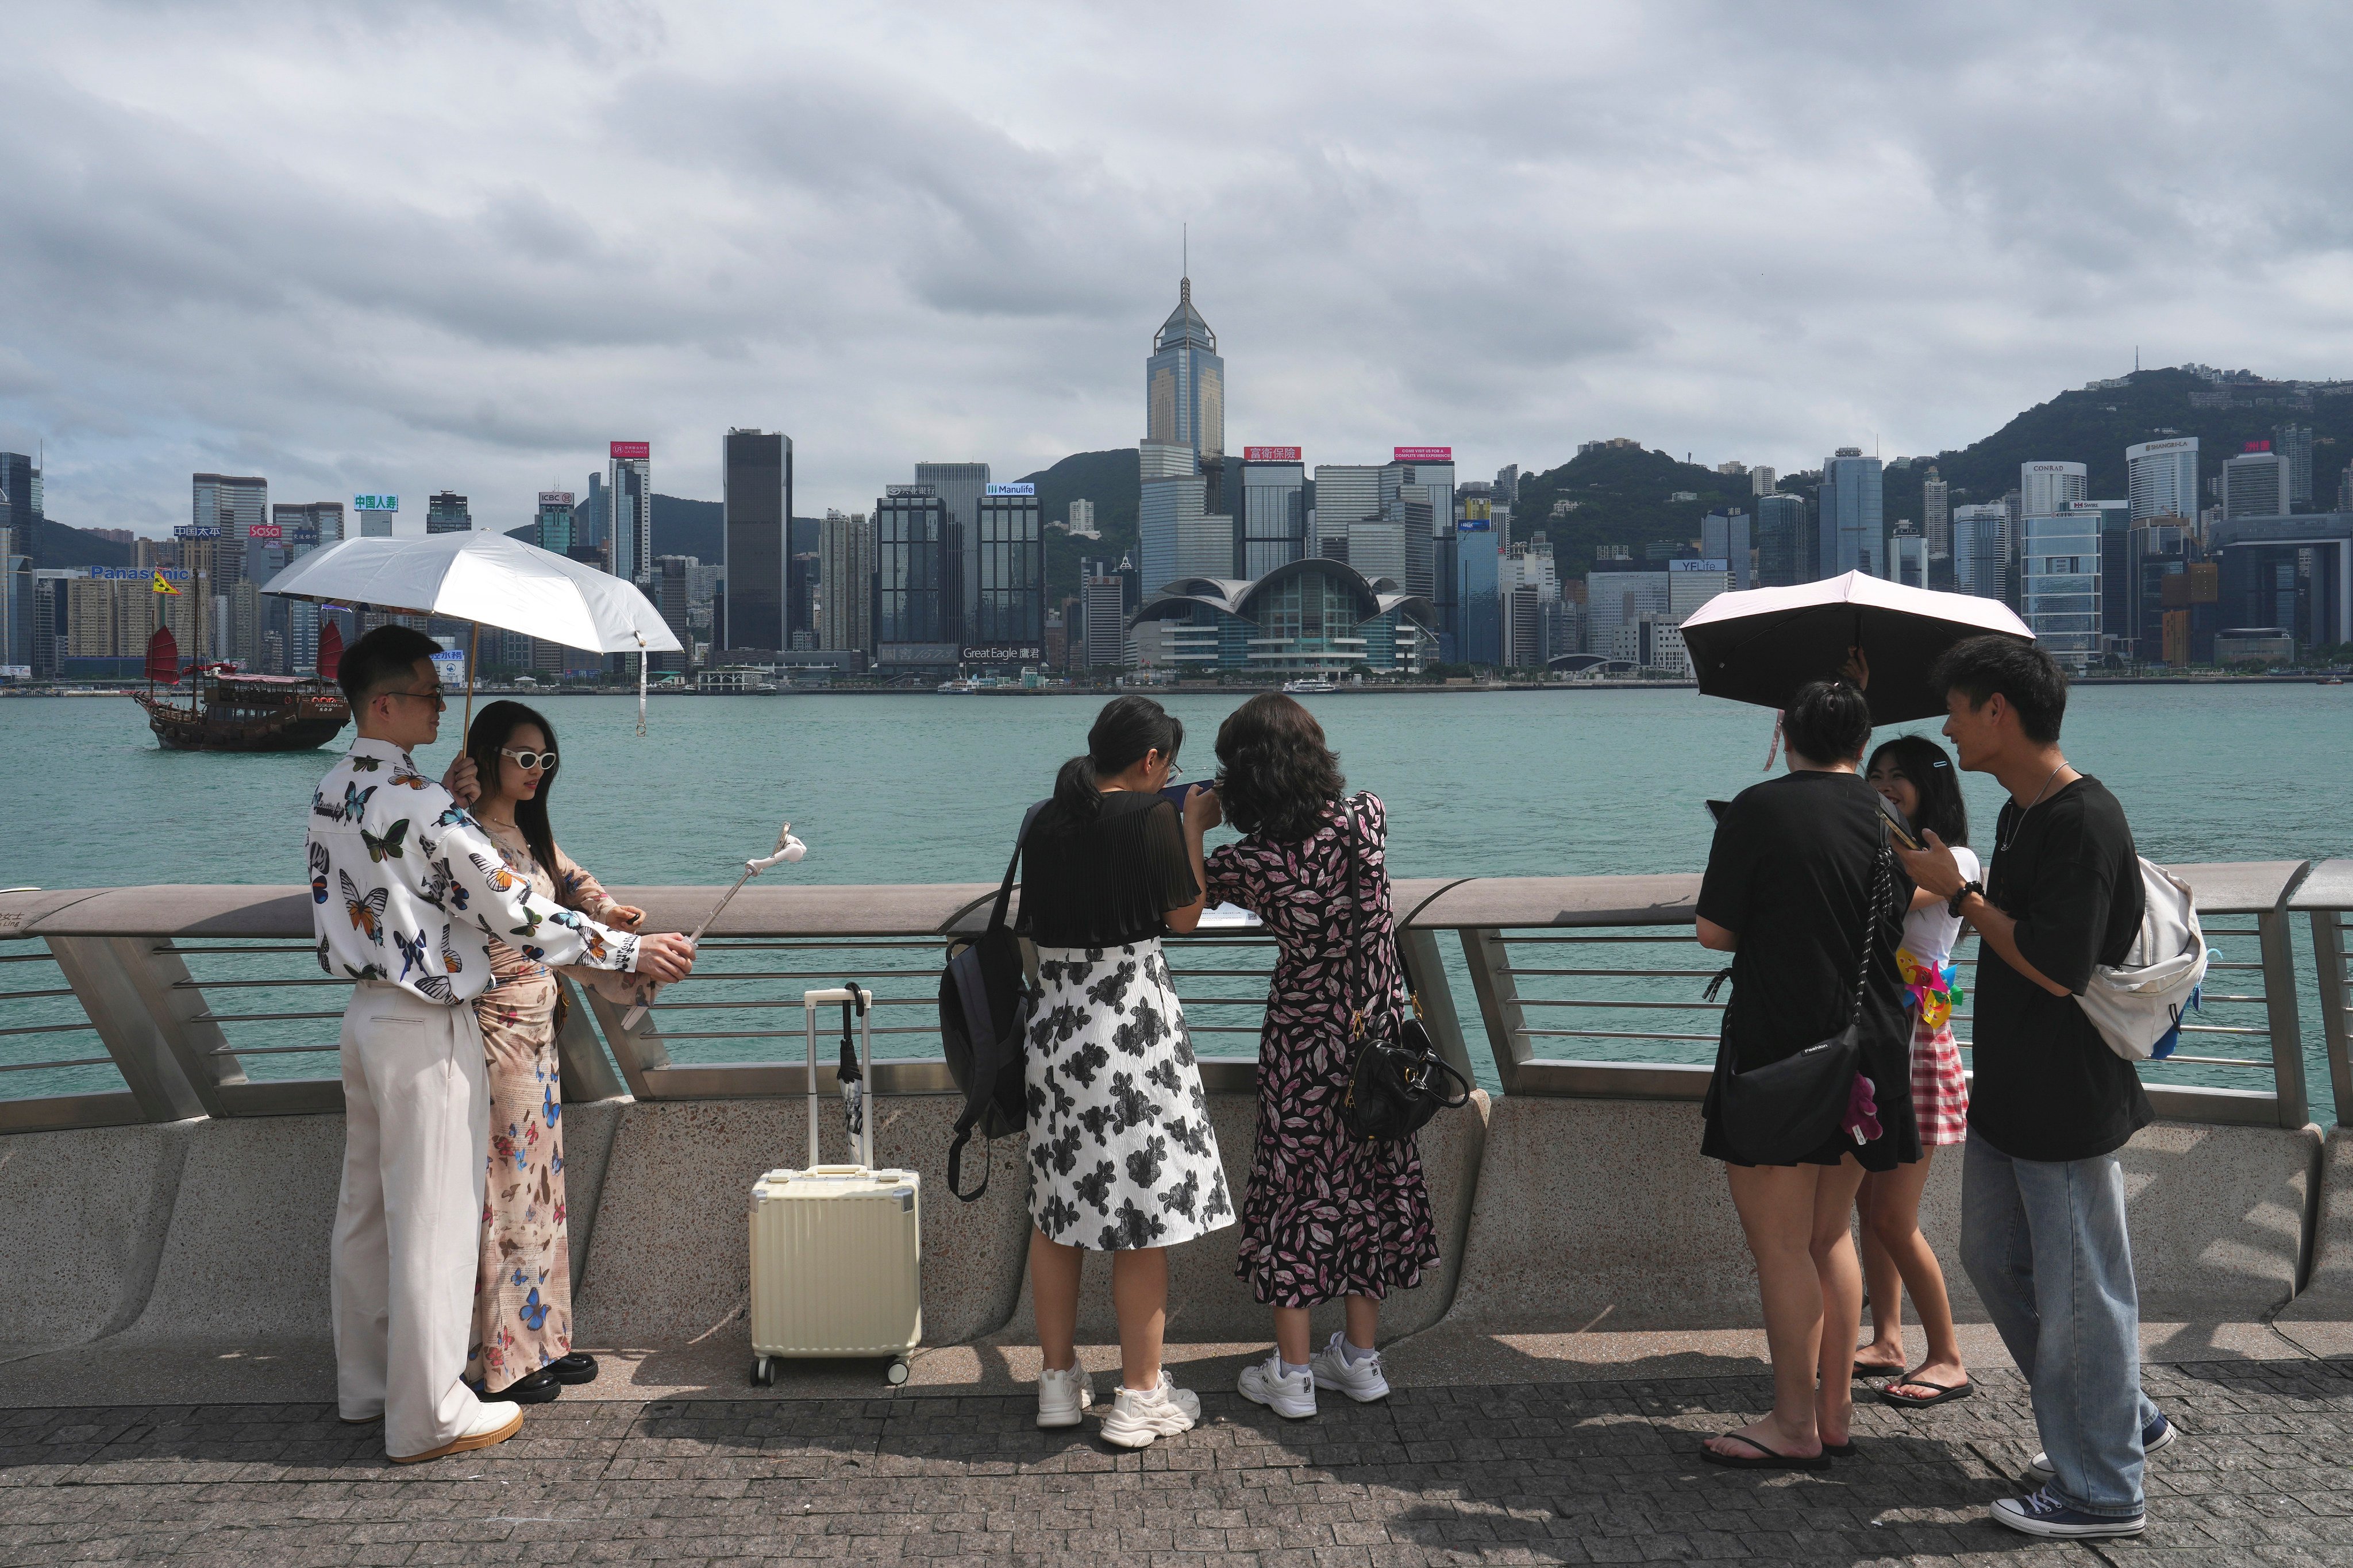 Hong Kong’s General Chamber of Commerce has said the city can push ahead with efforts to have the duty-free shopping allowance raised for mainland Chinese visitors. Photo: Elson Li